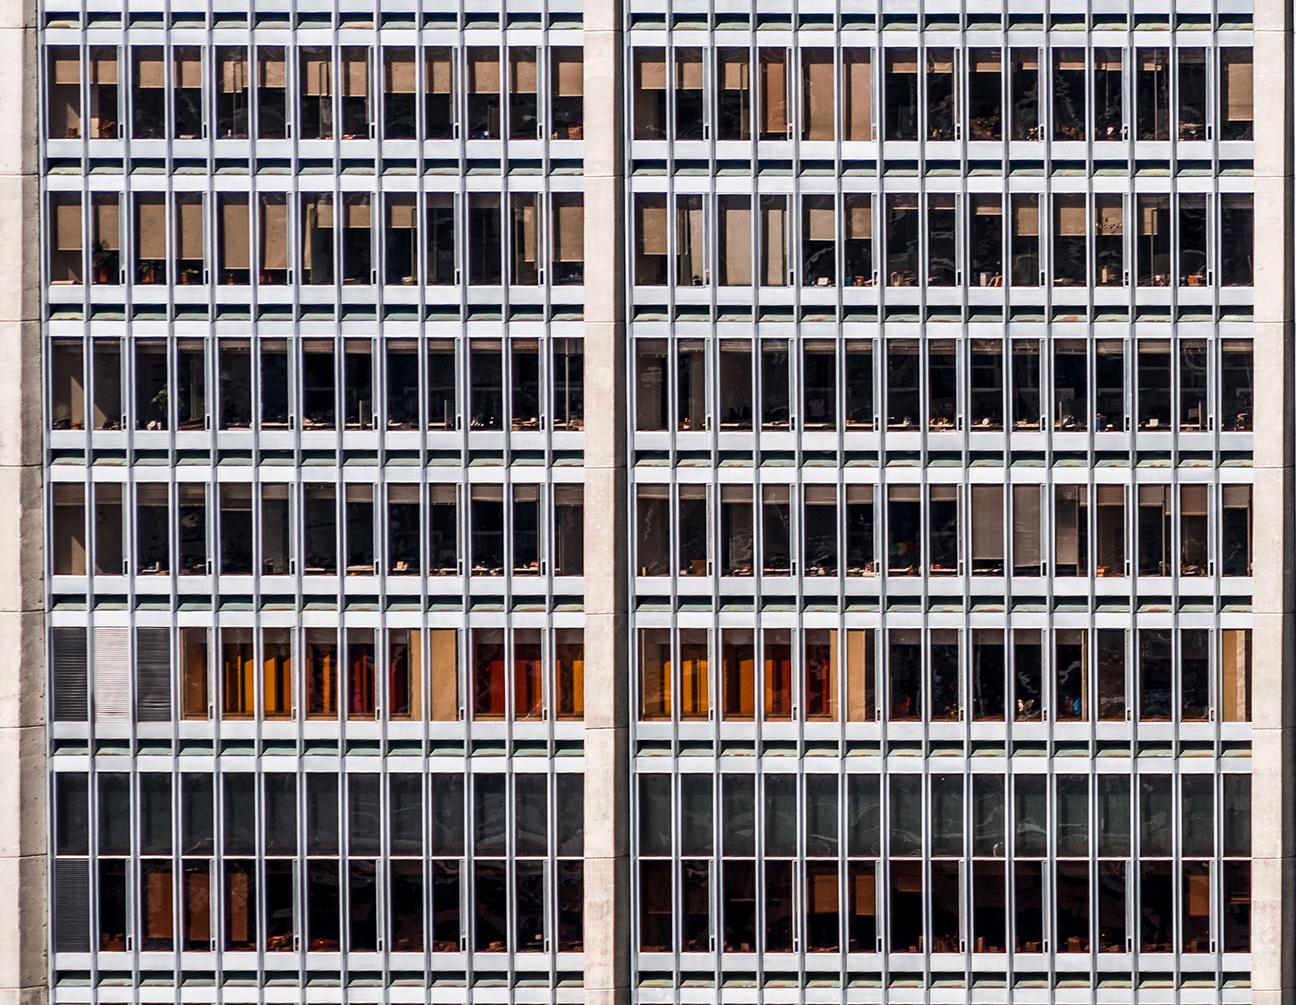 1003 Windows. Abstract architectural  landscape color photograph  - Photograph by Javier Rey